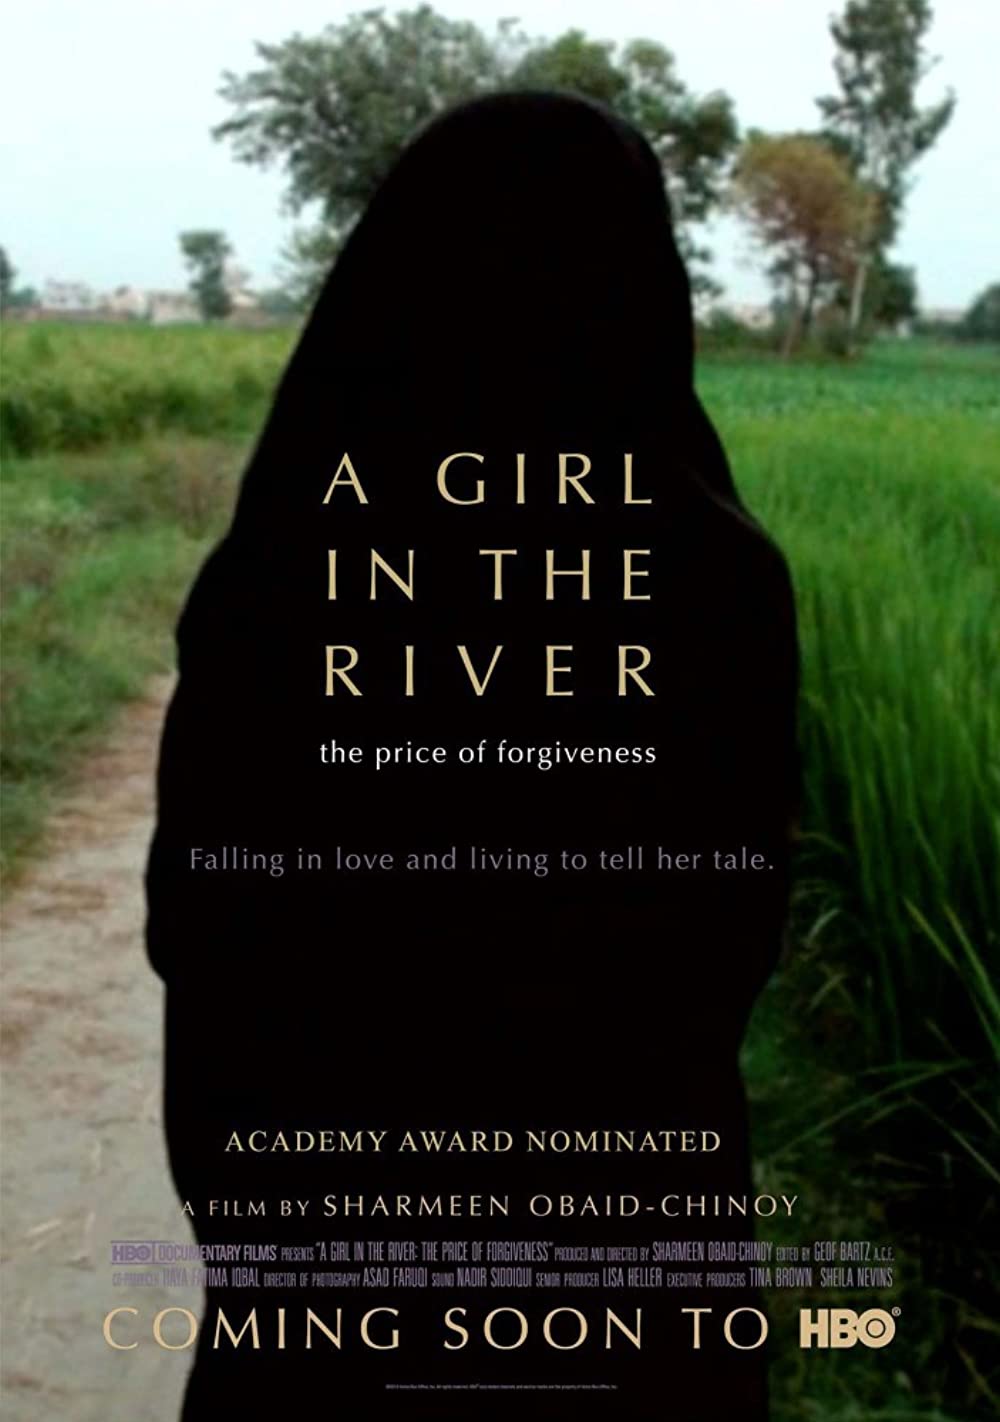 A Girl in the River: The Price of Forgiveness (Short 2015)